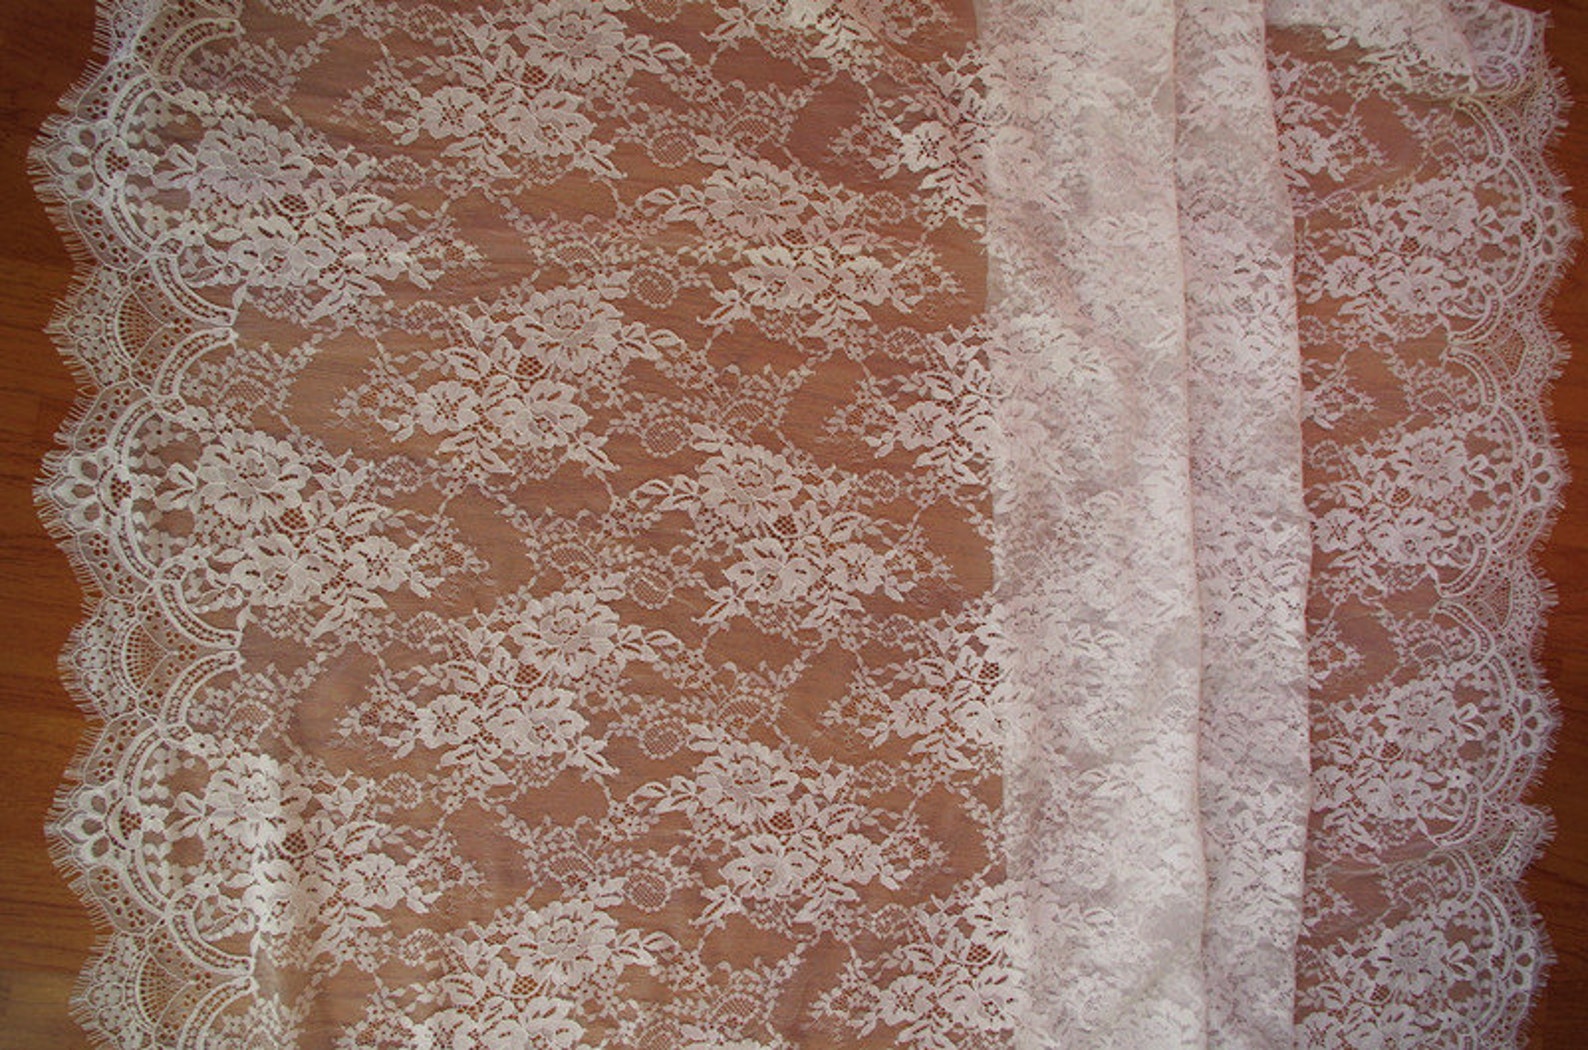 Off White Chantilly Lace Fabric Bridal Chantilly Lace Retro - Etsy